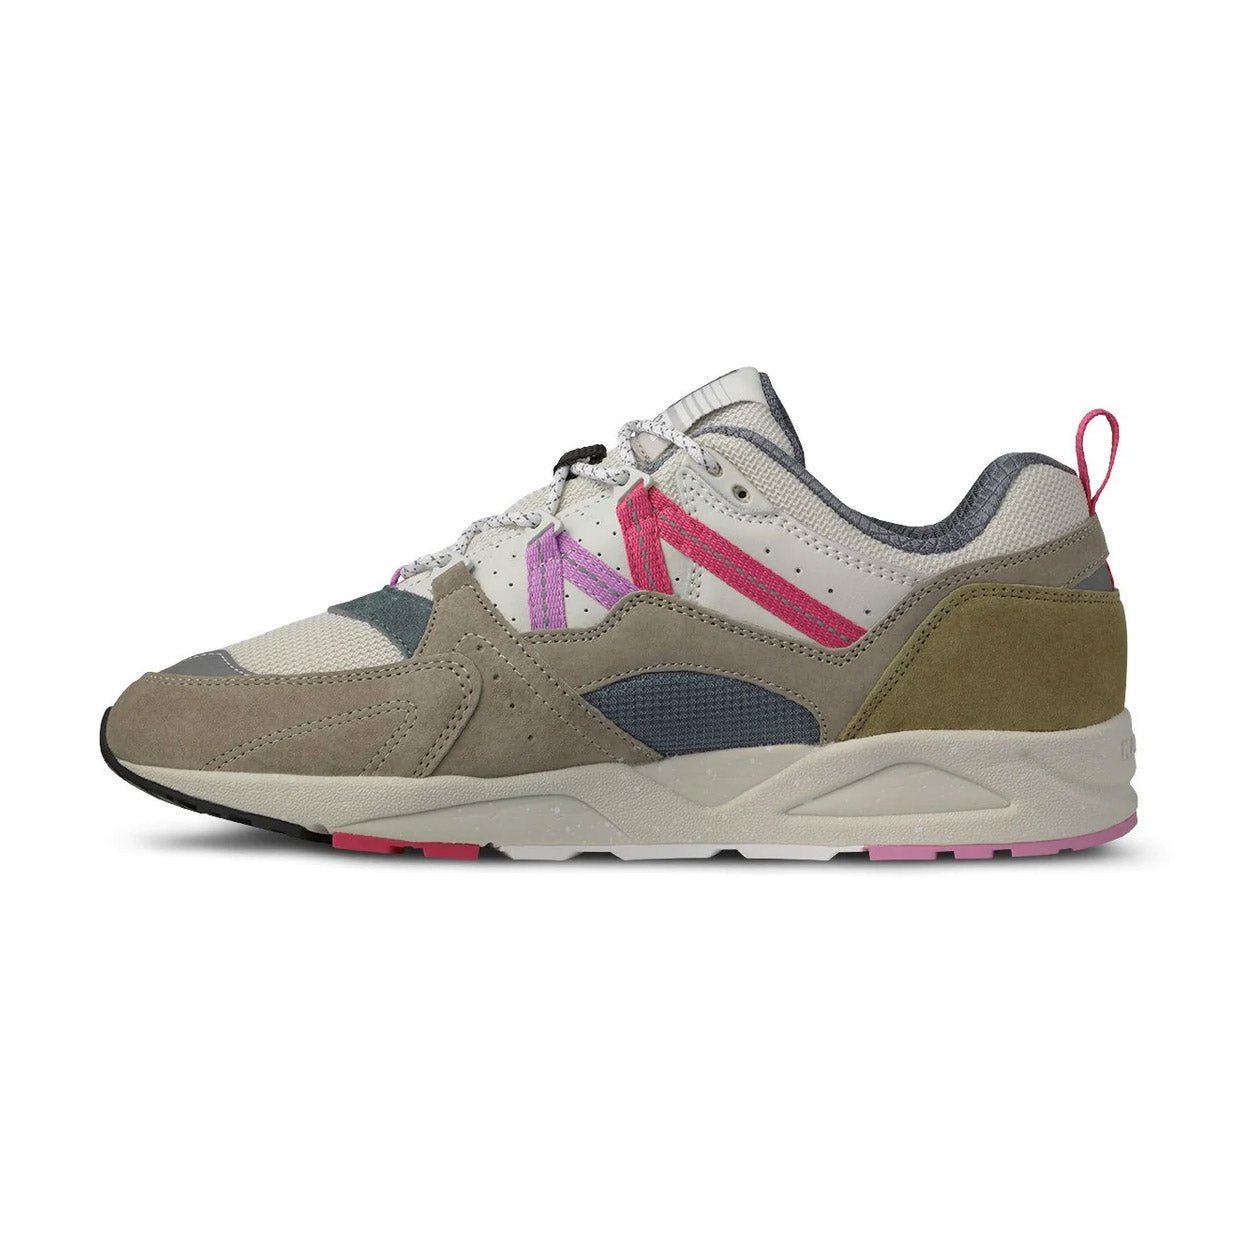 Karhu Fusion 2.0 'The Forest Rules'